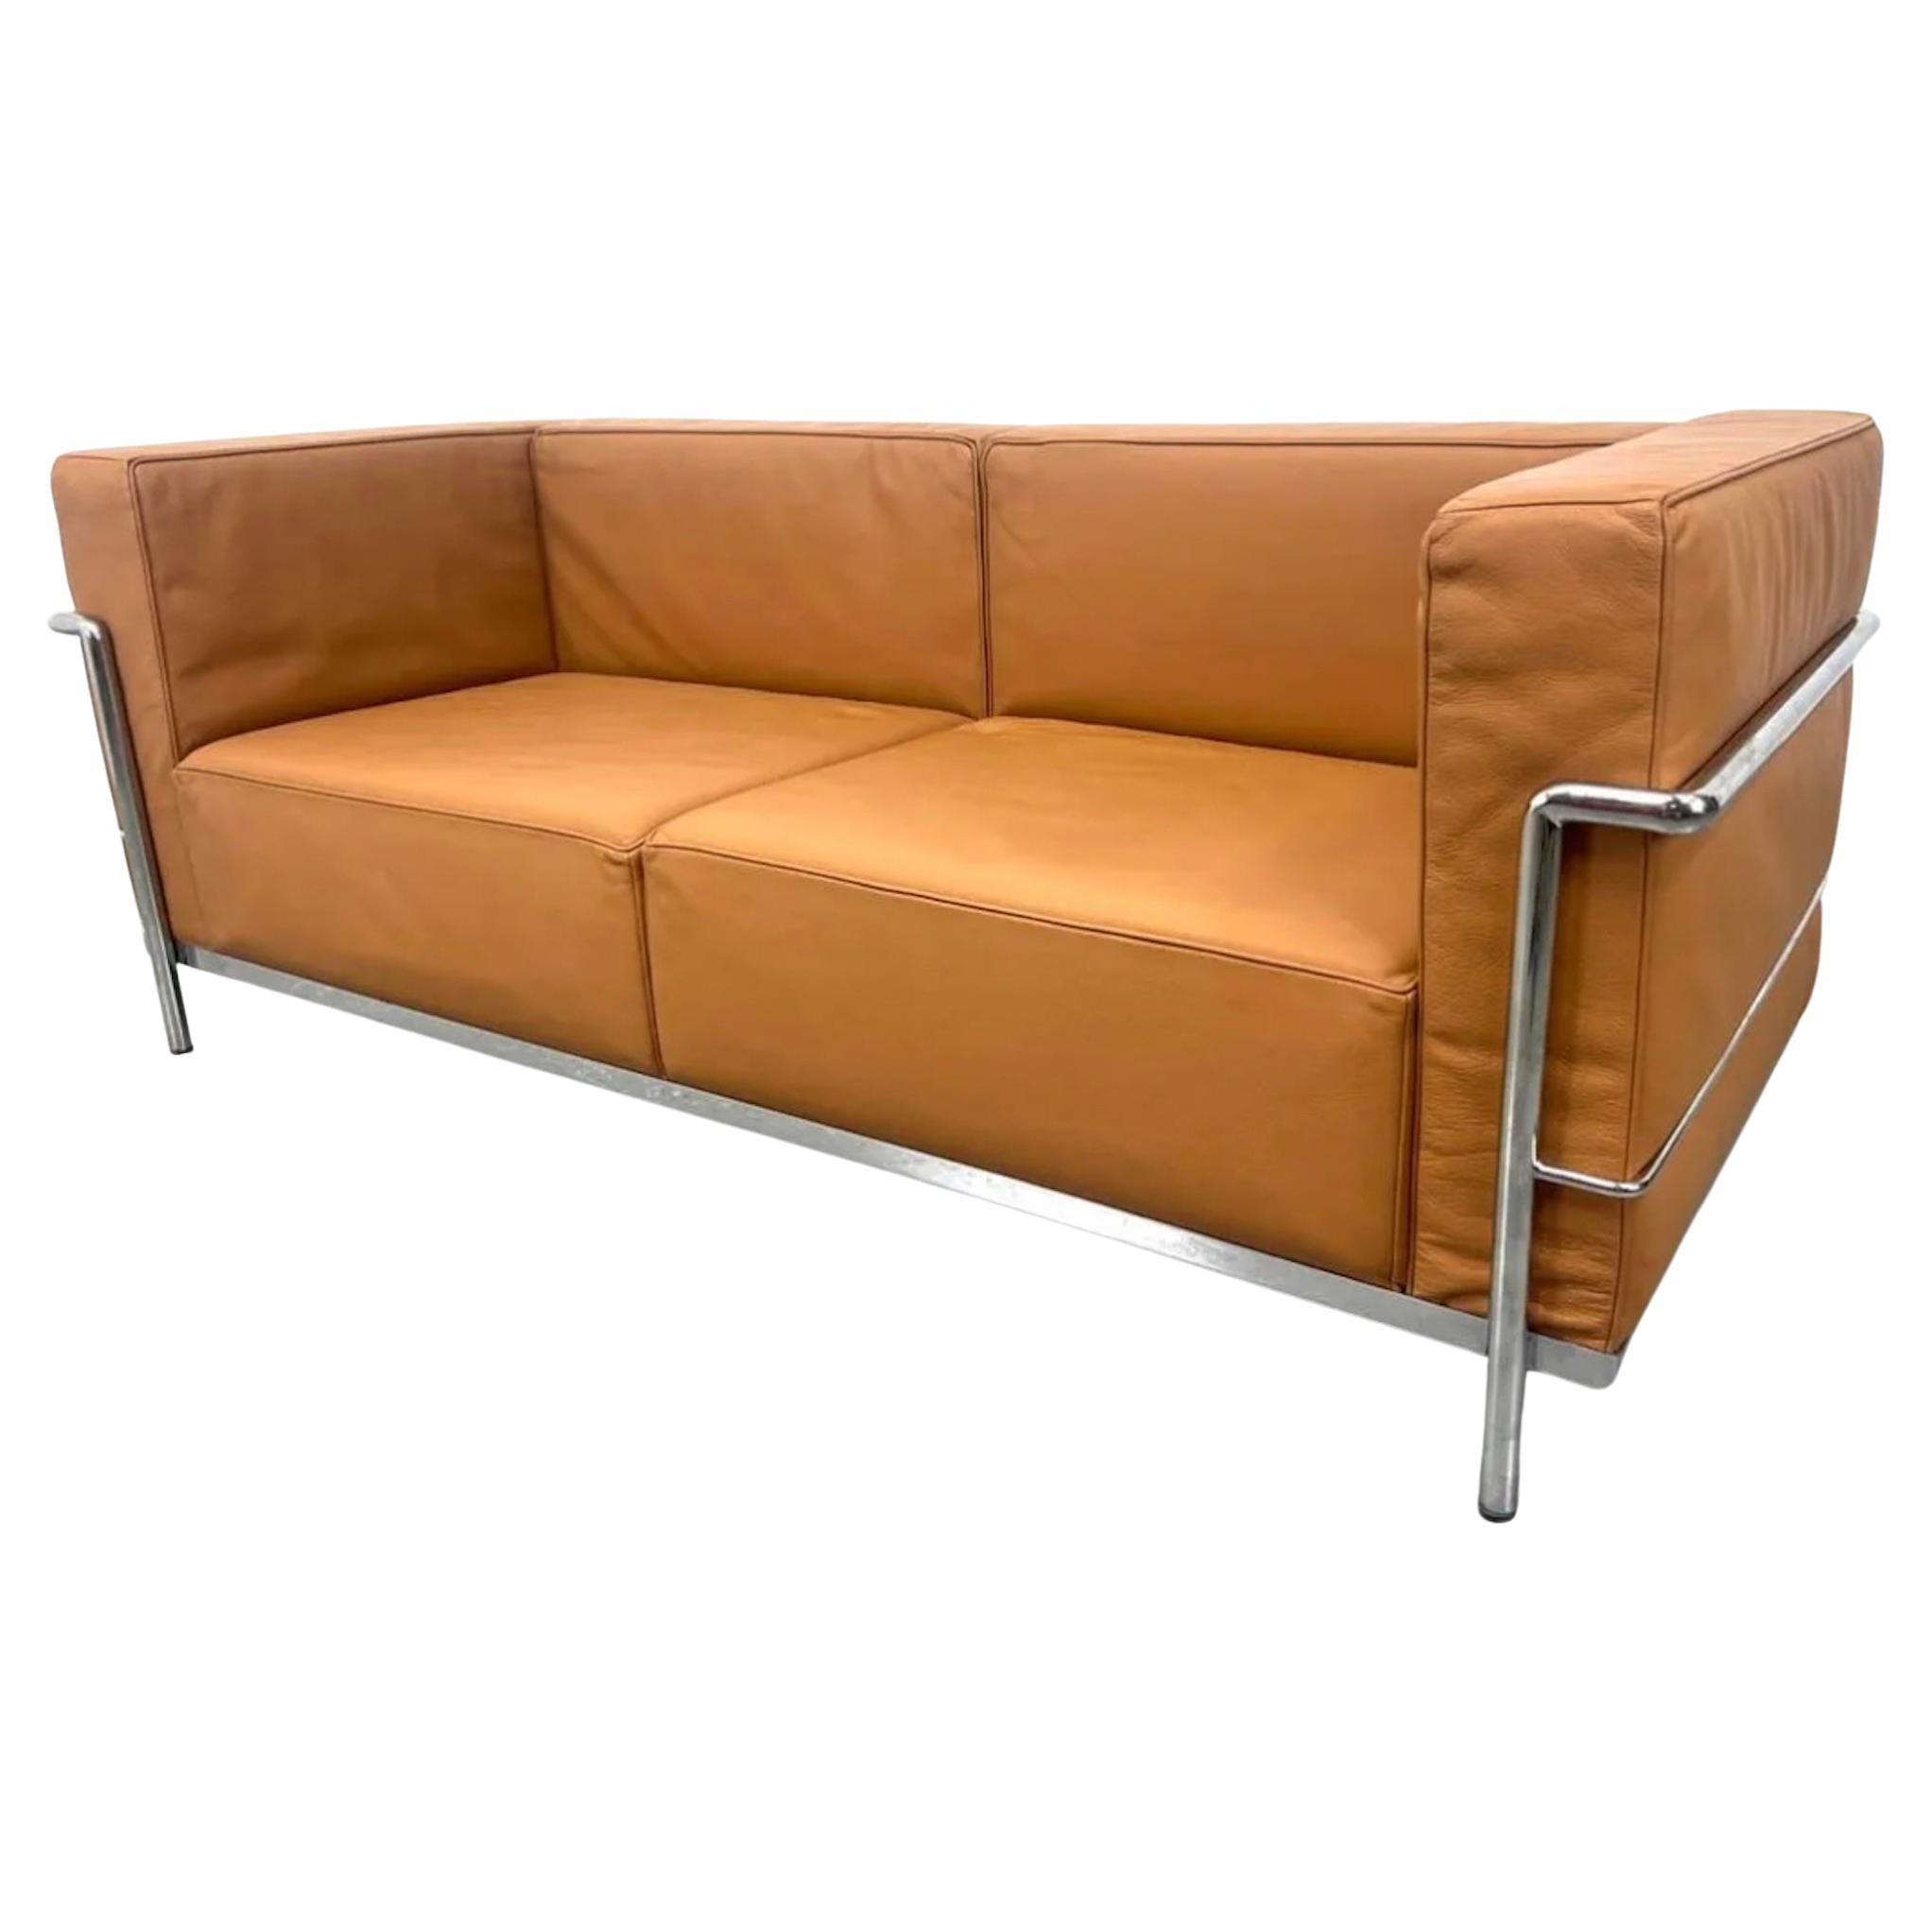 Vintage 2 seat sofa or lovseat by Le Corbusier. Model LC2 in Tan Leather in very good vintage condition. Triple chrome plated steel frame. Manufactured by Gordon International. All straps are good all cushions come out. Located in Brooklyn